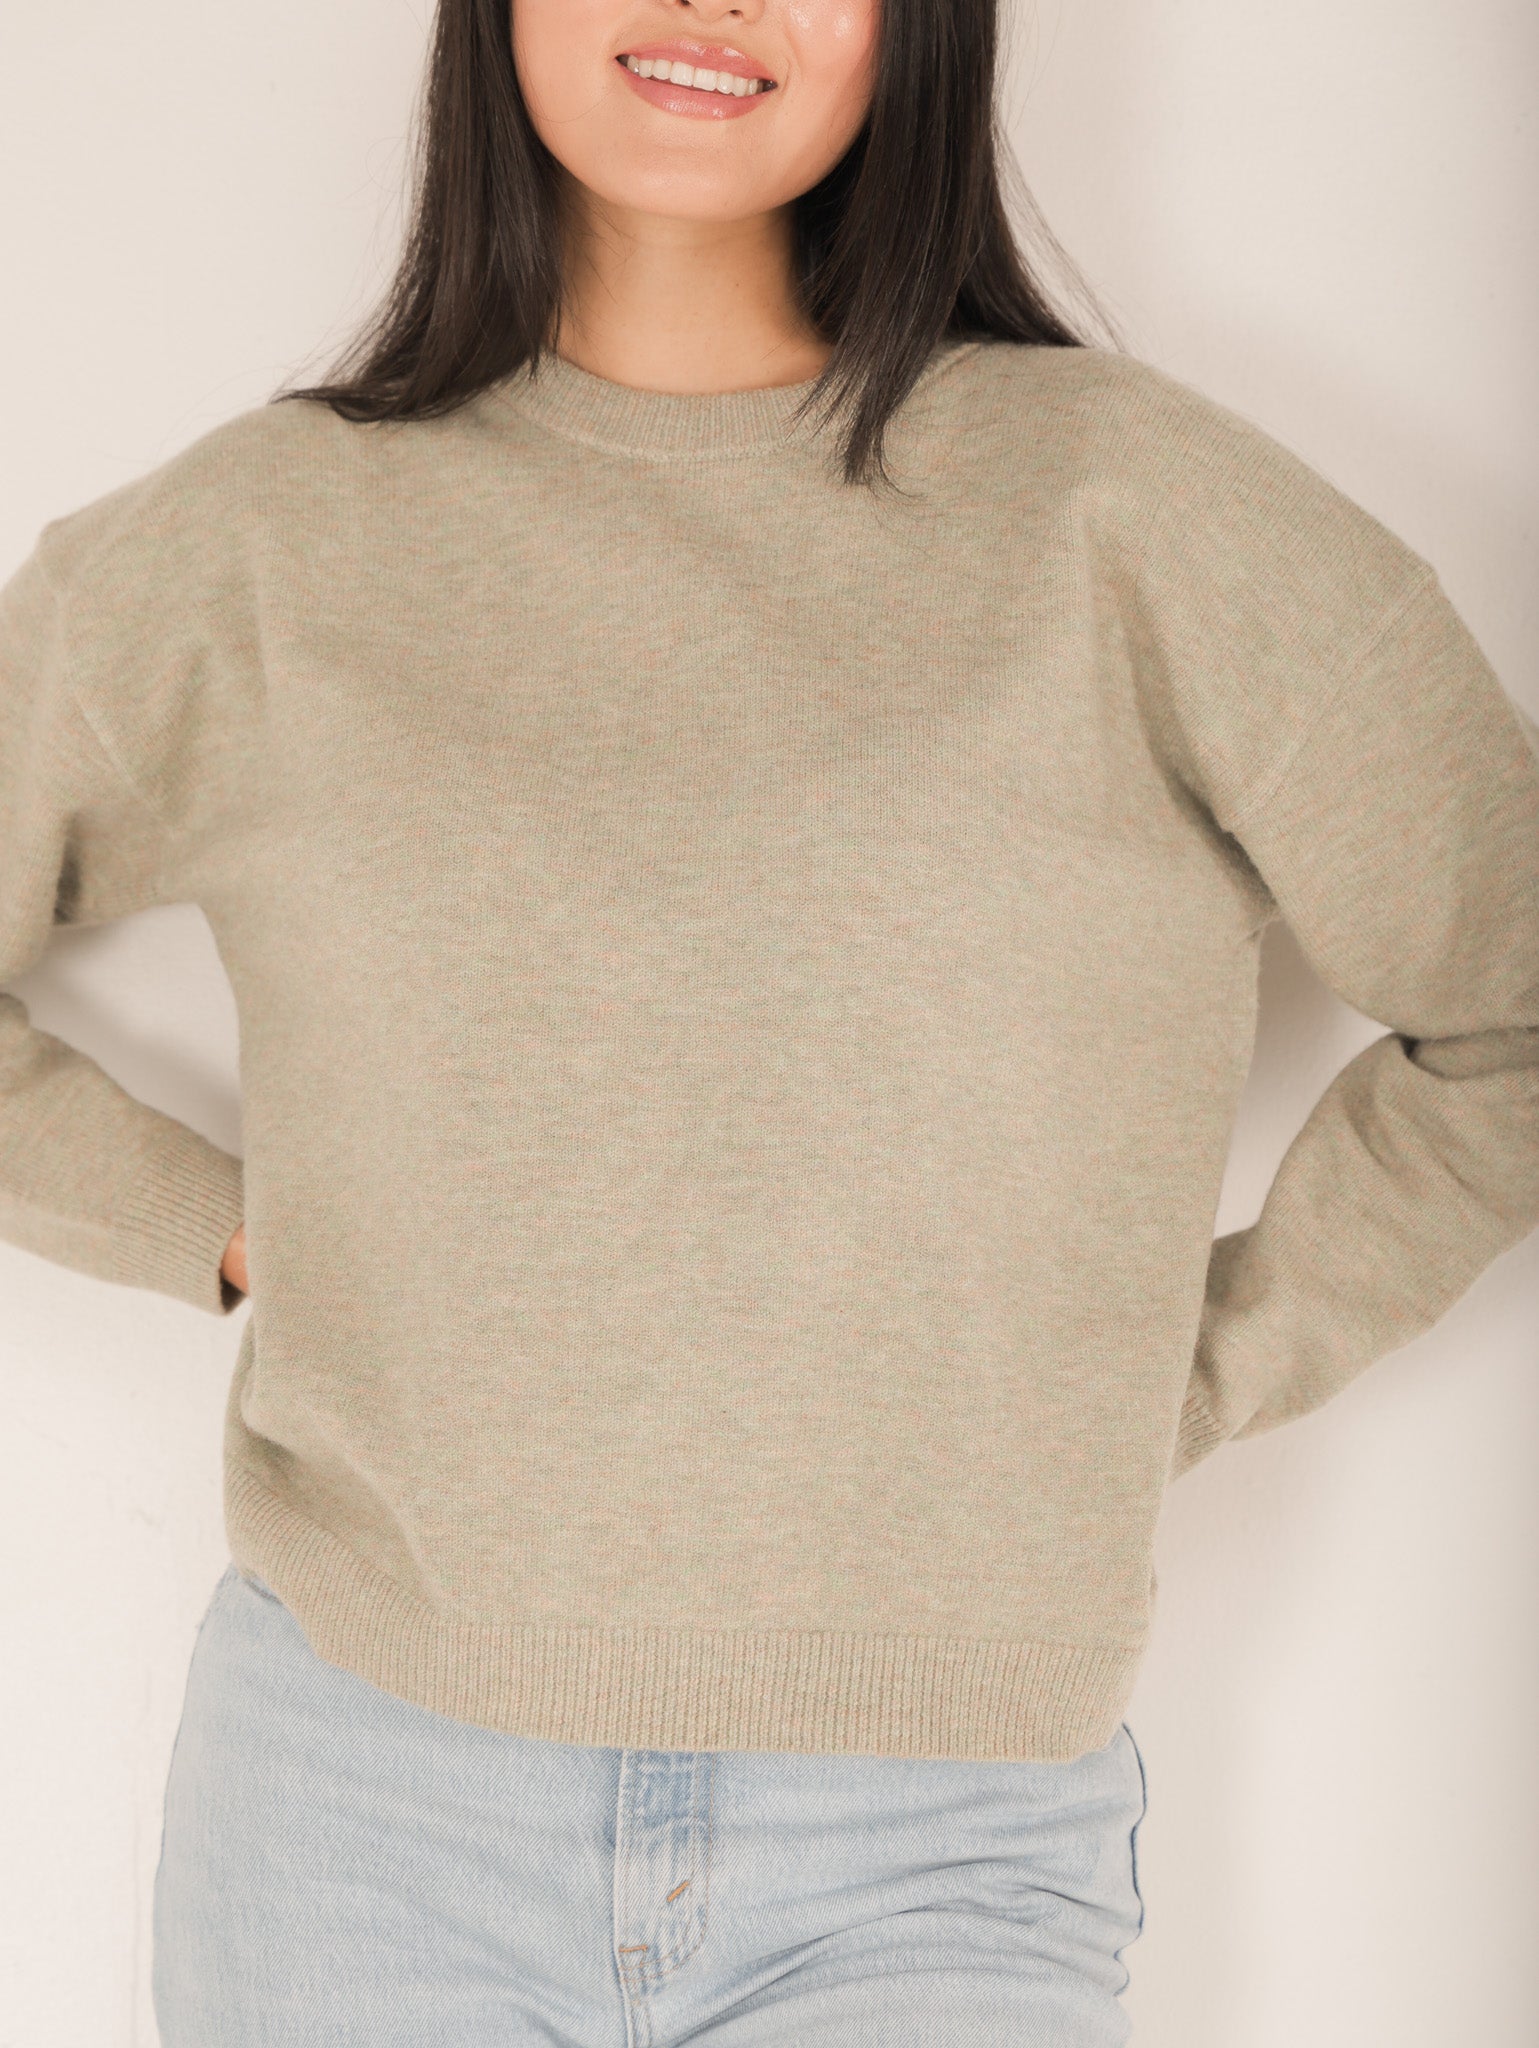 Molly Green - Ramsey Sweater - Sweaters_Cardigans